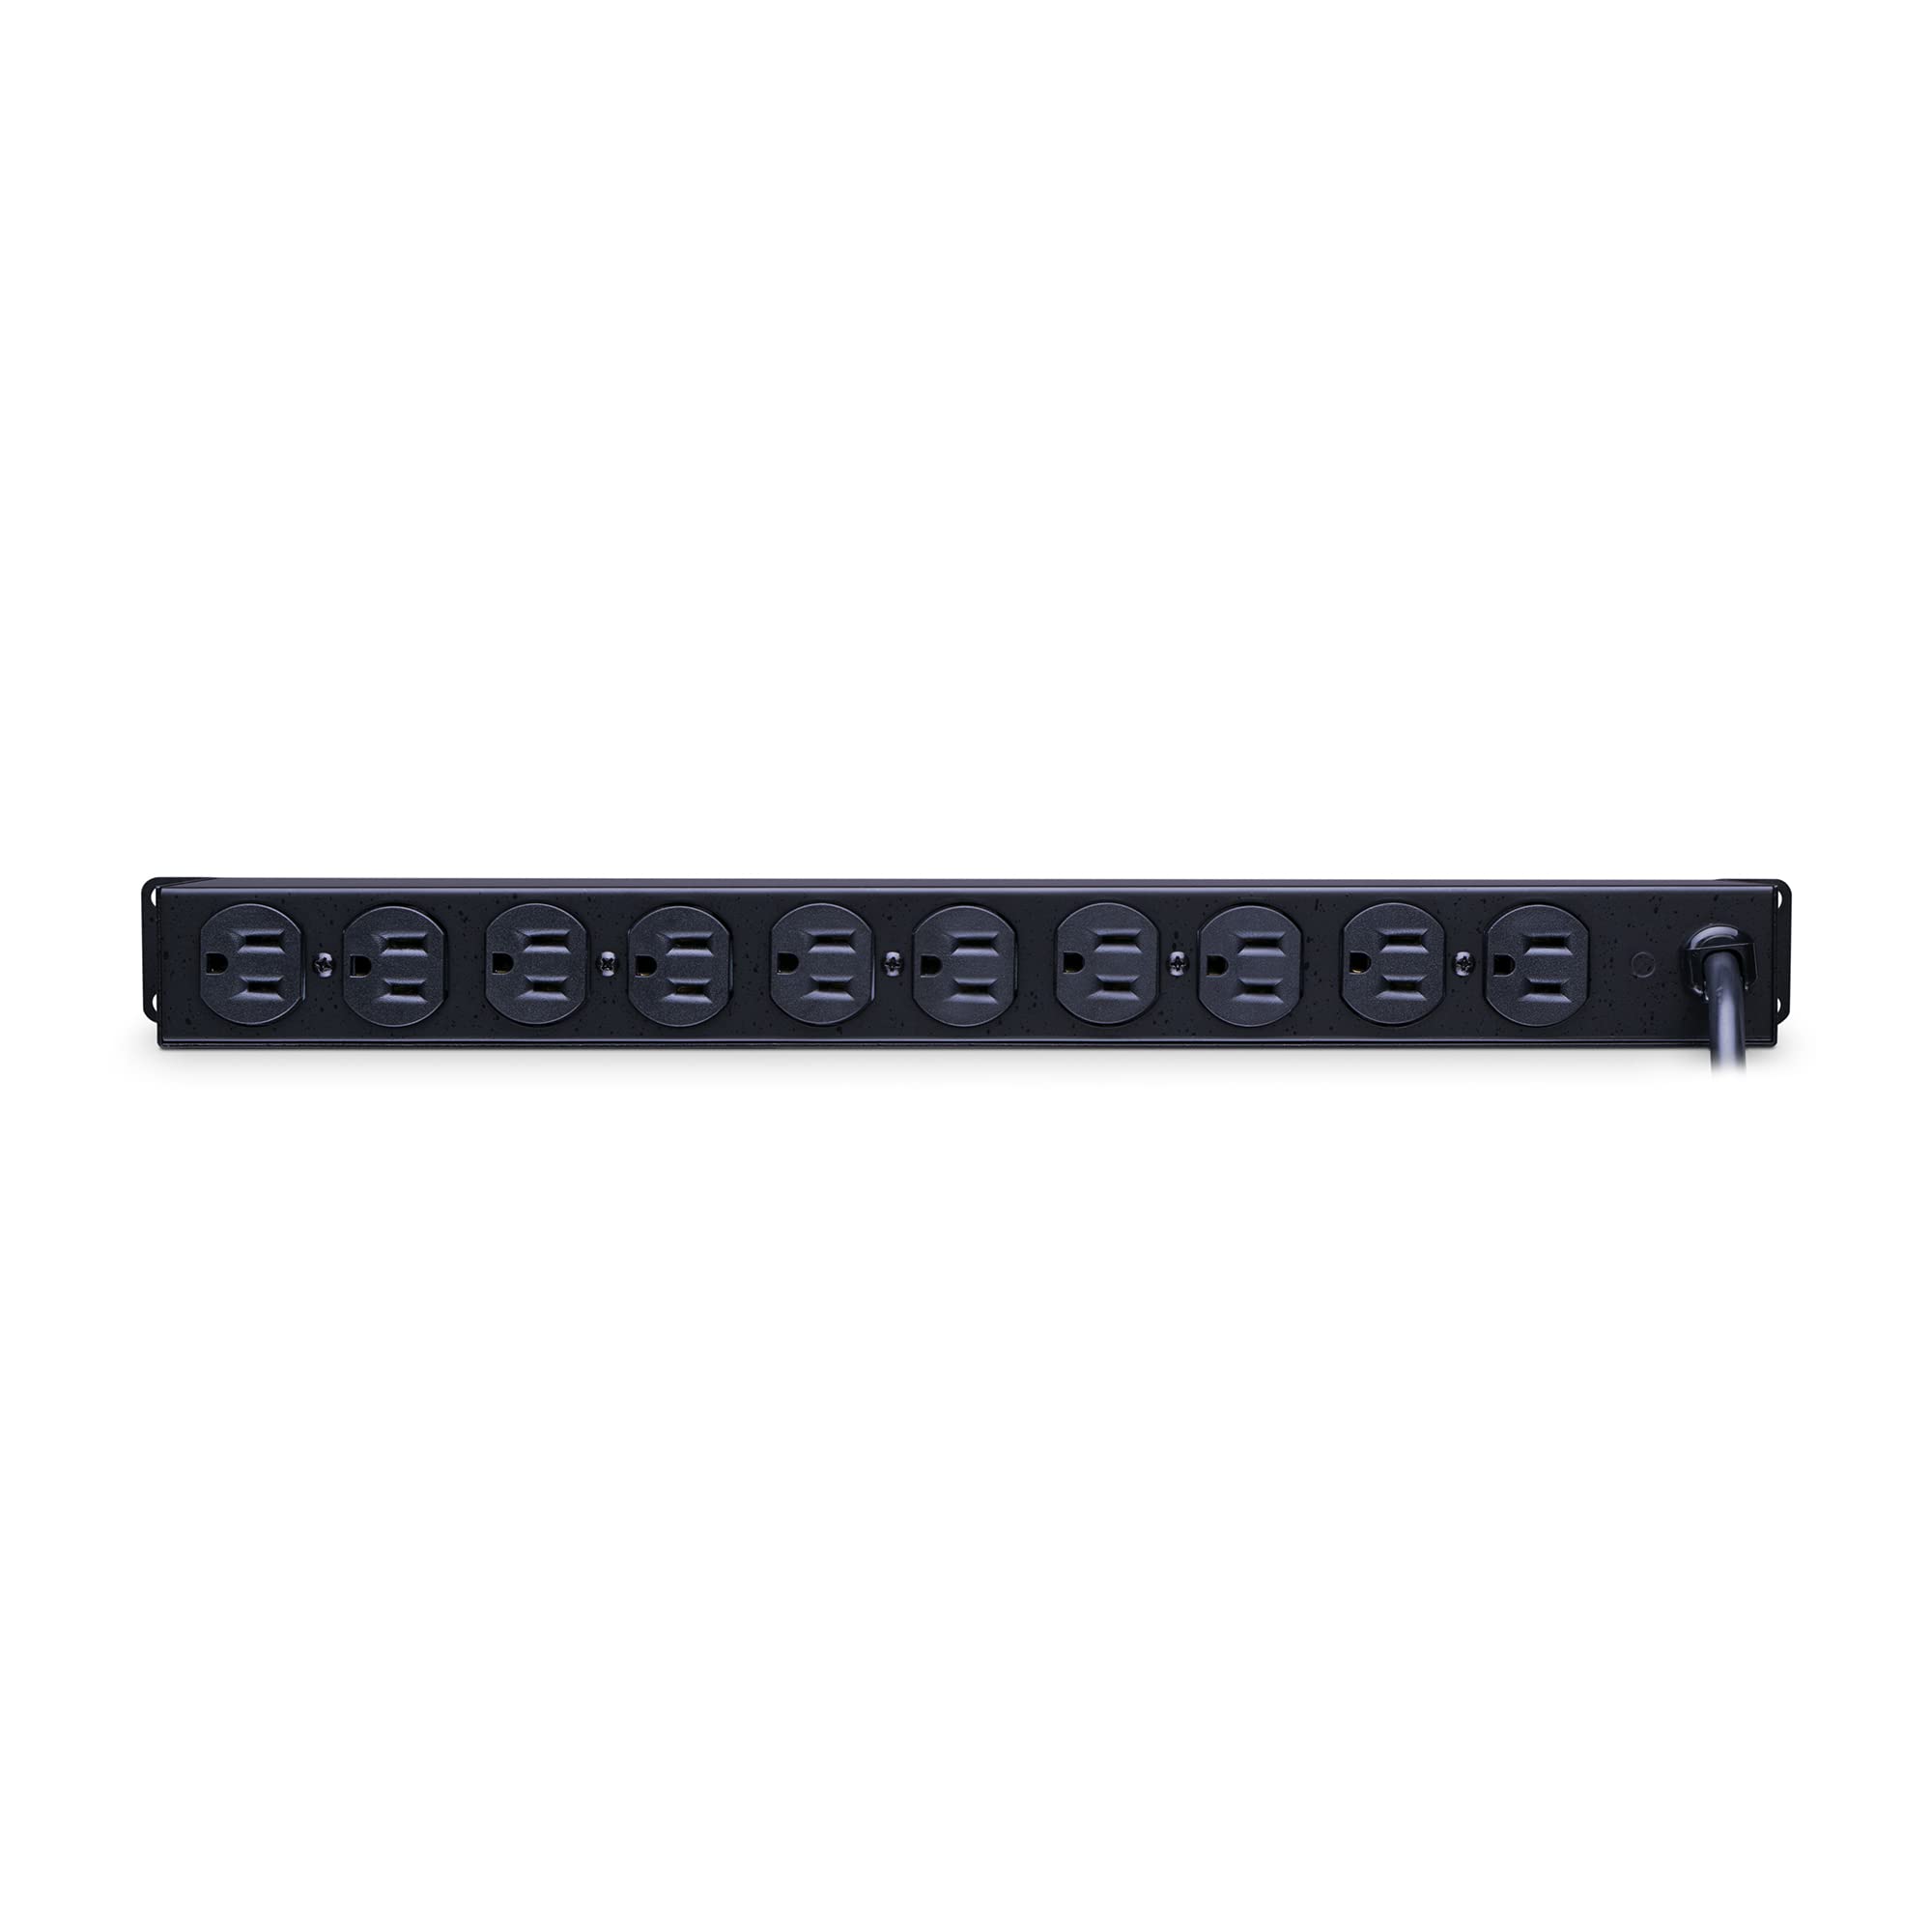 CyberPower CPS1215RM Basic PDU, 100-125V/15A, 10 Outlets, 15ft Power Cord, 1U Rackmount